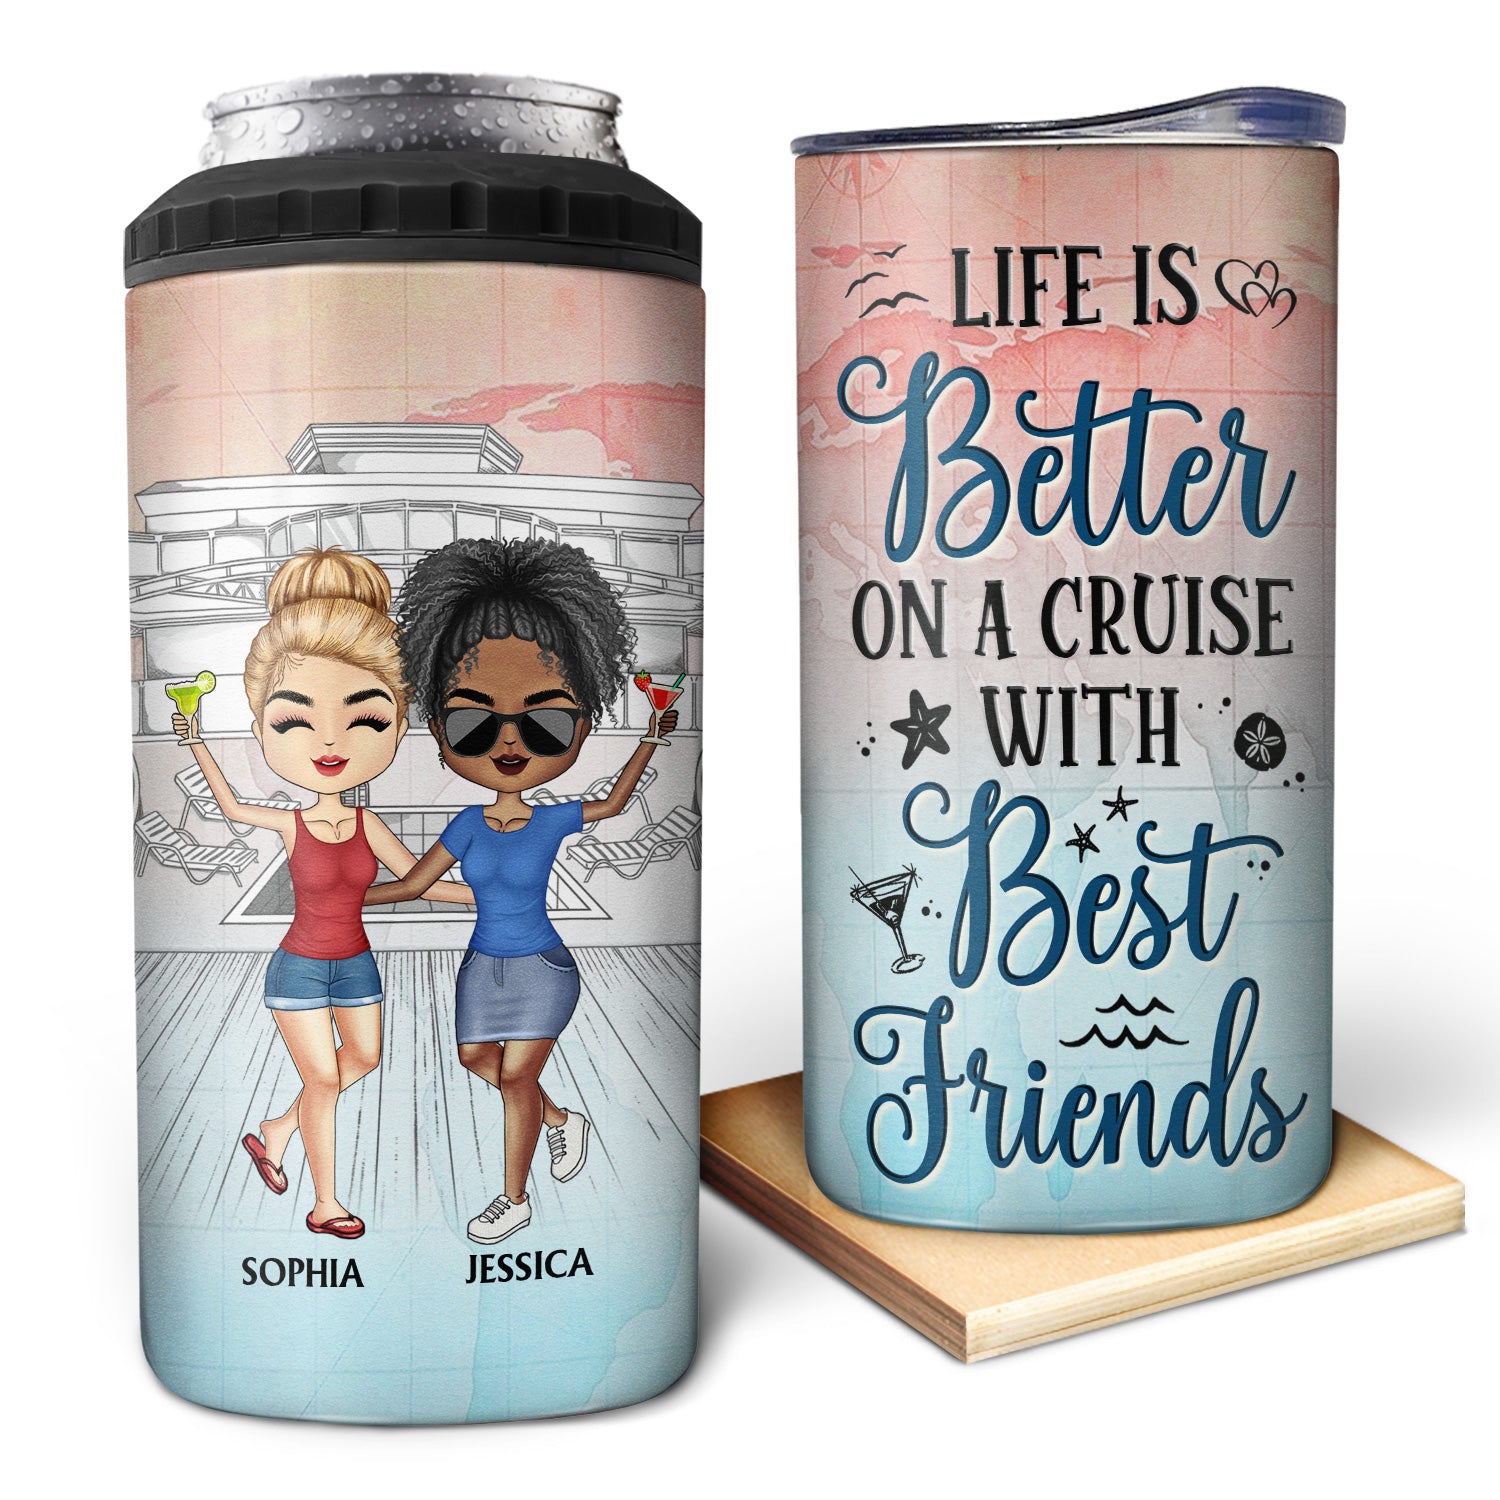 Life Is Better On A Cruise With Best Friends - Traveling, Cruising Gift For BFF, Siblings, Colleagues - Personalized Custom 4 In 1 Can Cooler Tumbler